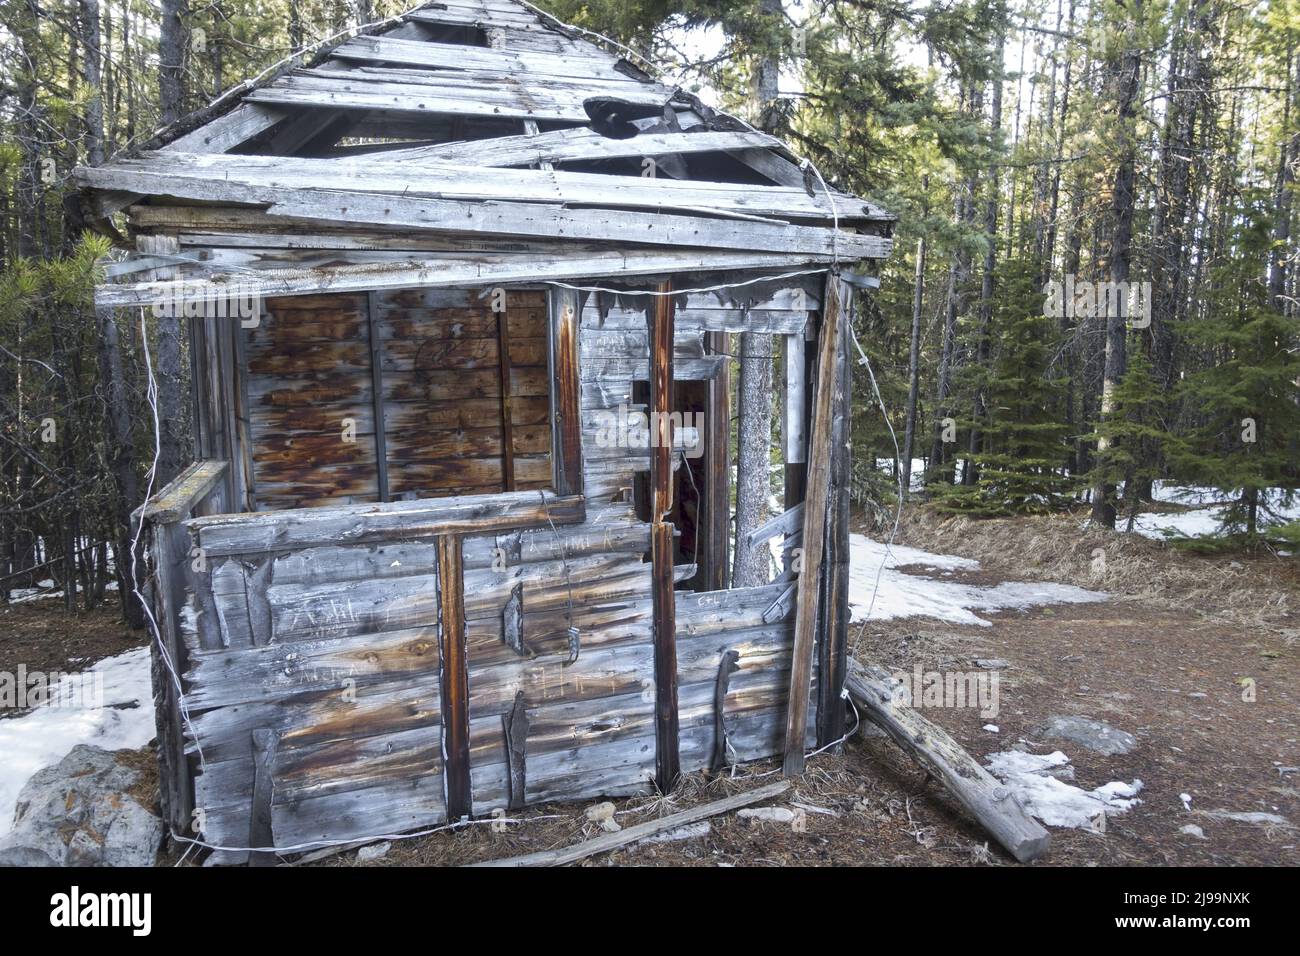 Historic Hummingbird Plume Fire Lookout Wooden Log Cabin Exterior. Kananaskis Country Alberta at Foothills of Canadian Rocky Mountains Stock Photo